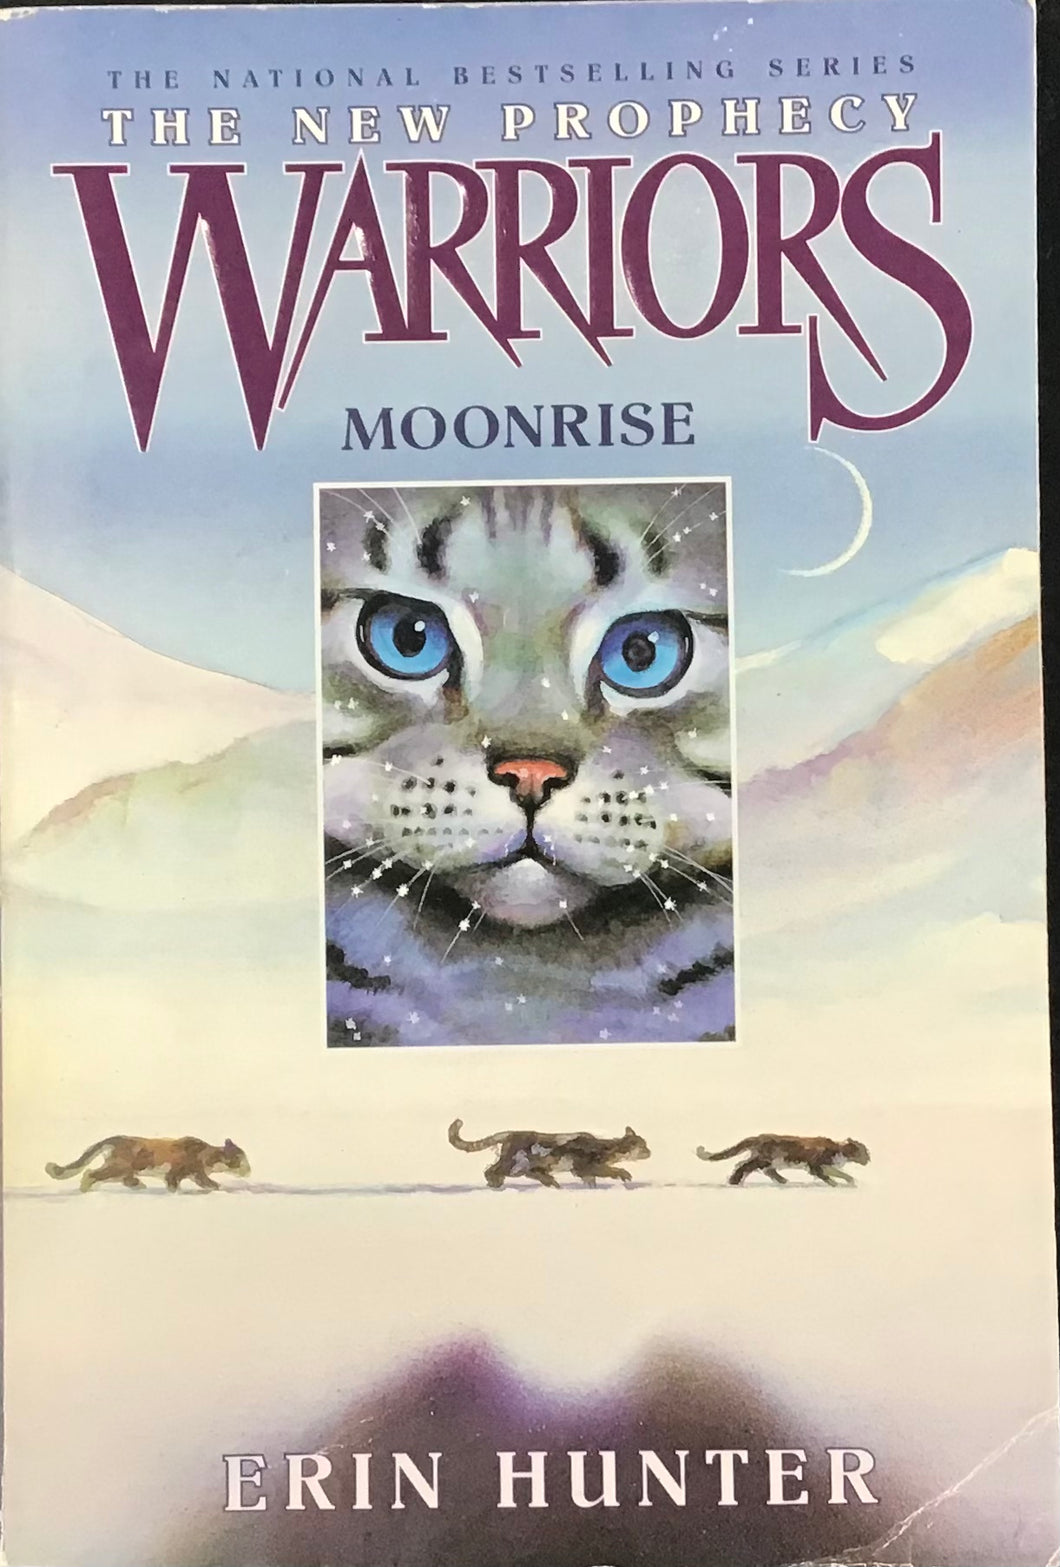 The New Prophecy Warriors Book 2: Moonrise by Erin Hunter